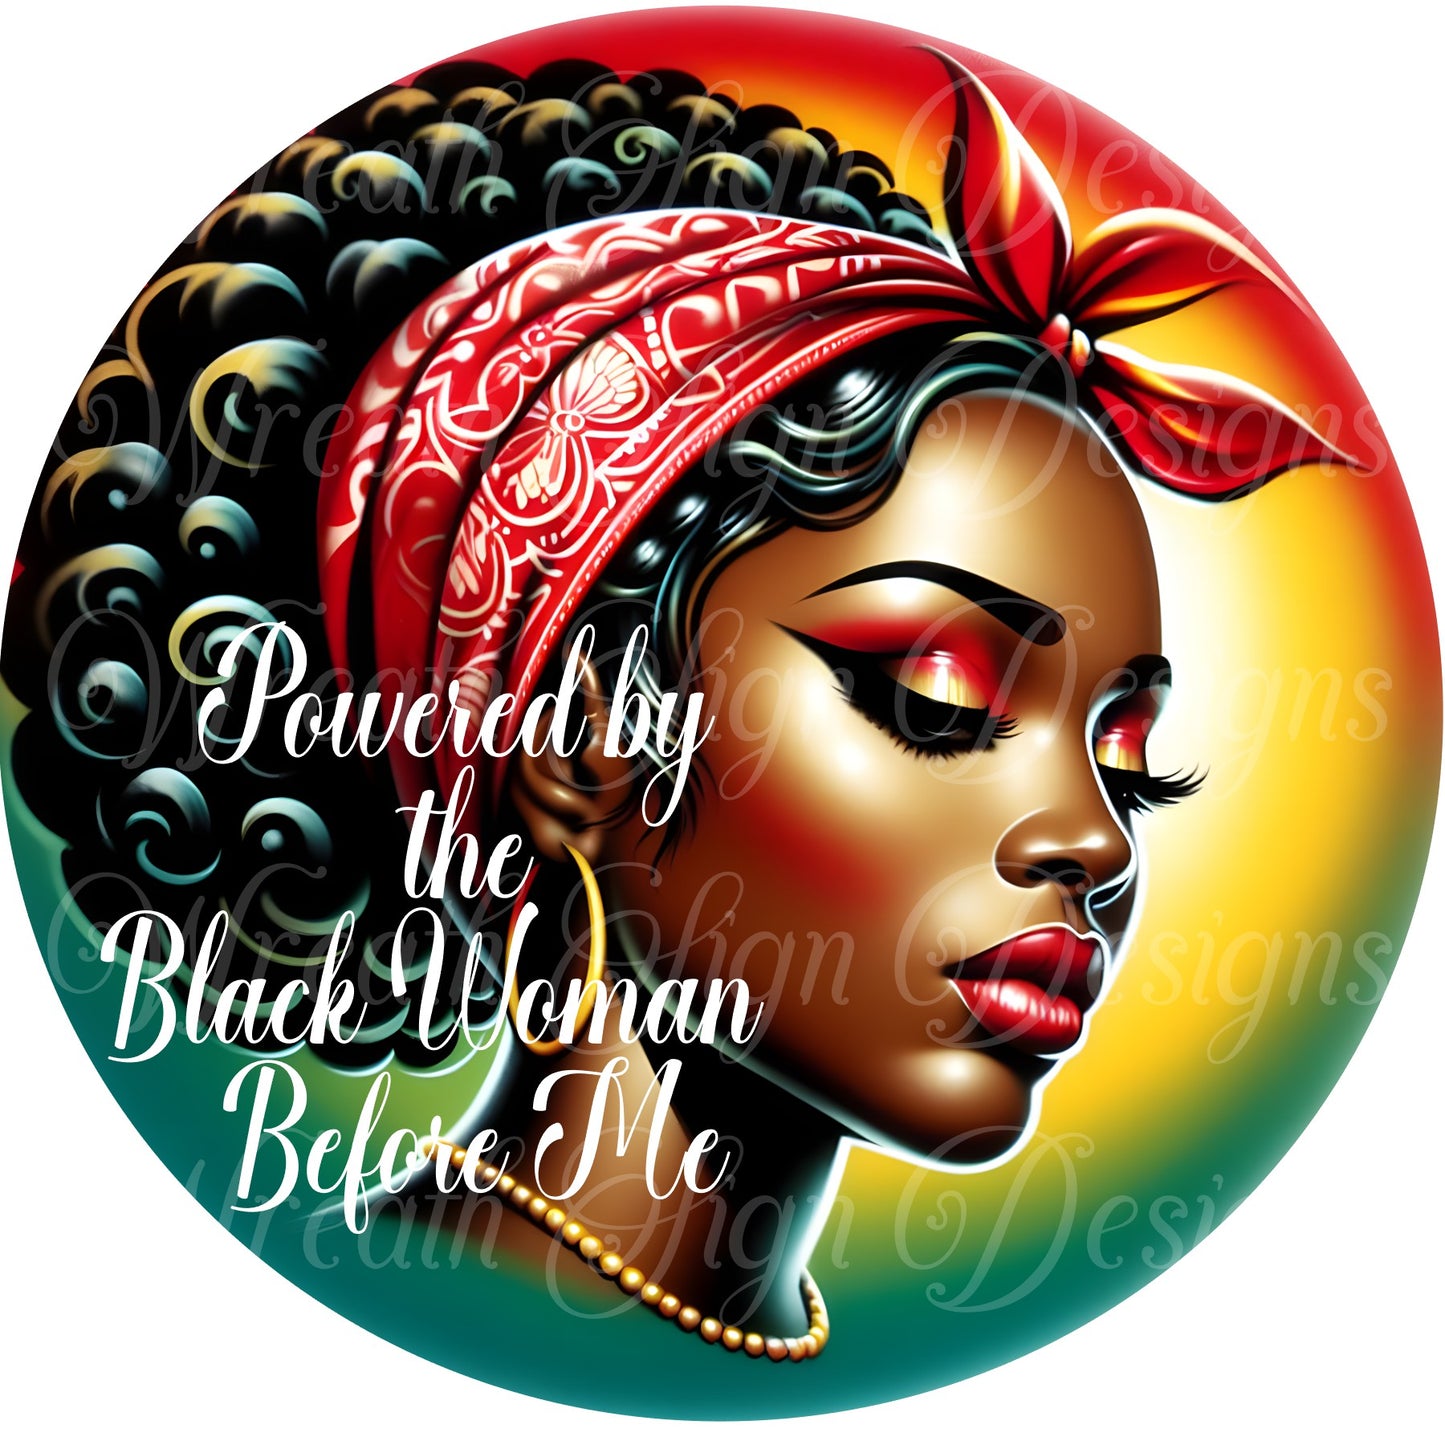 Powered by the Black Woman Before Me, Diva Queen round metal wreath sign, Proud Black Woman, Juneteenth wreath attachment, wreath center